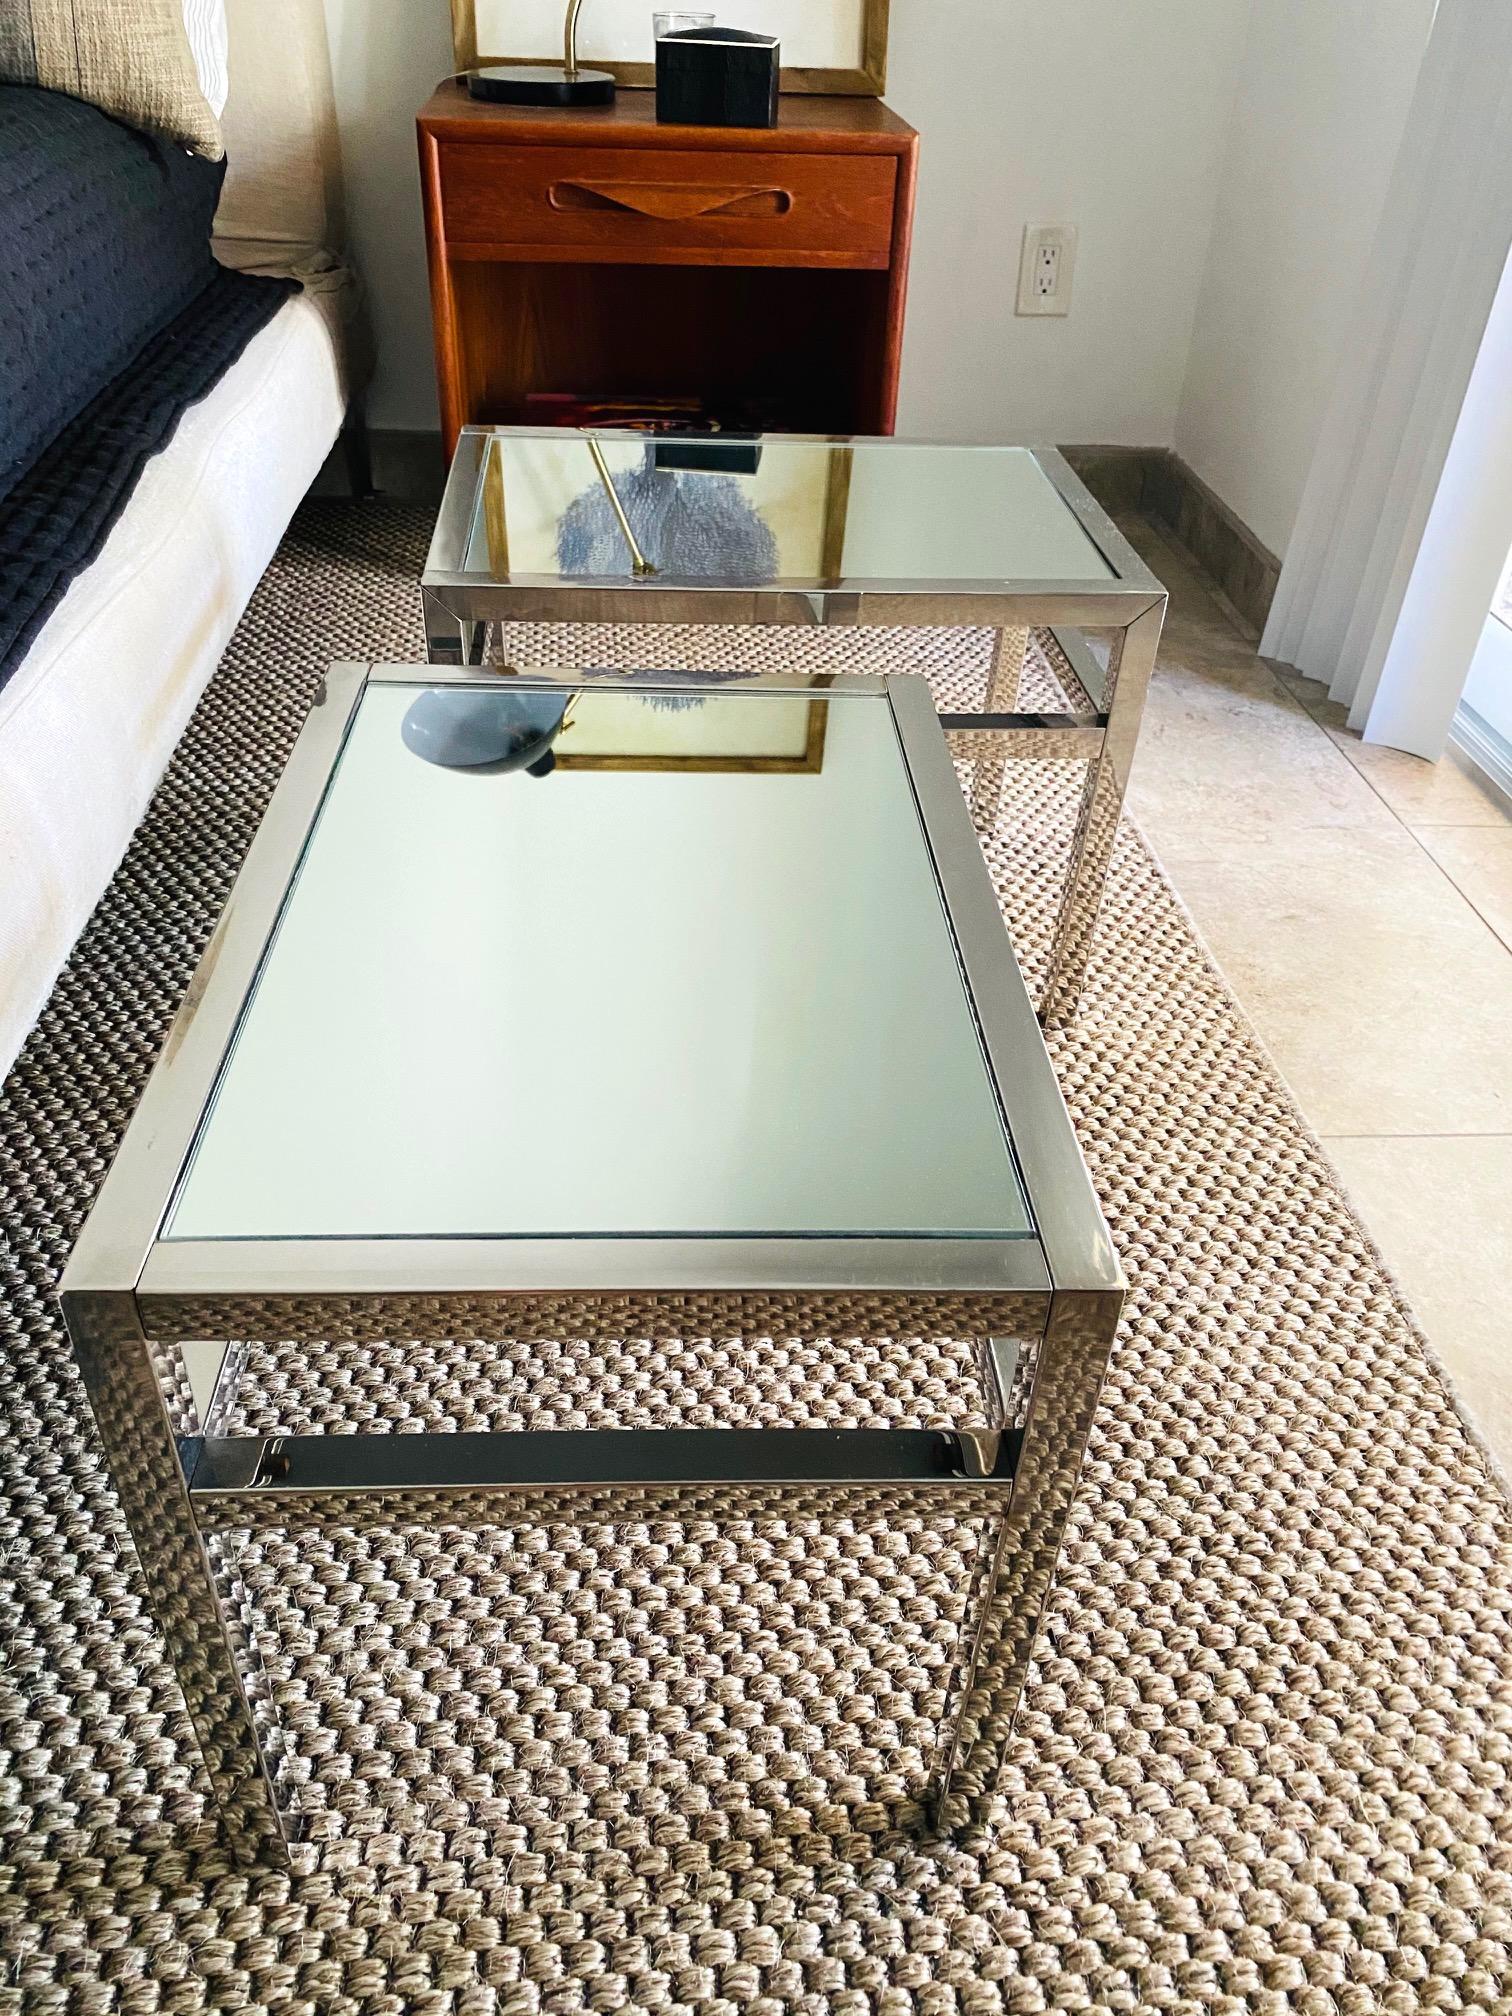 Pair of Chrome and Mirrored Side Tables in the style of Milo Baughman, c. 1970's For Sale 2